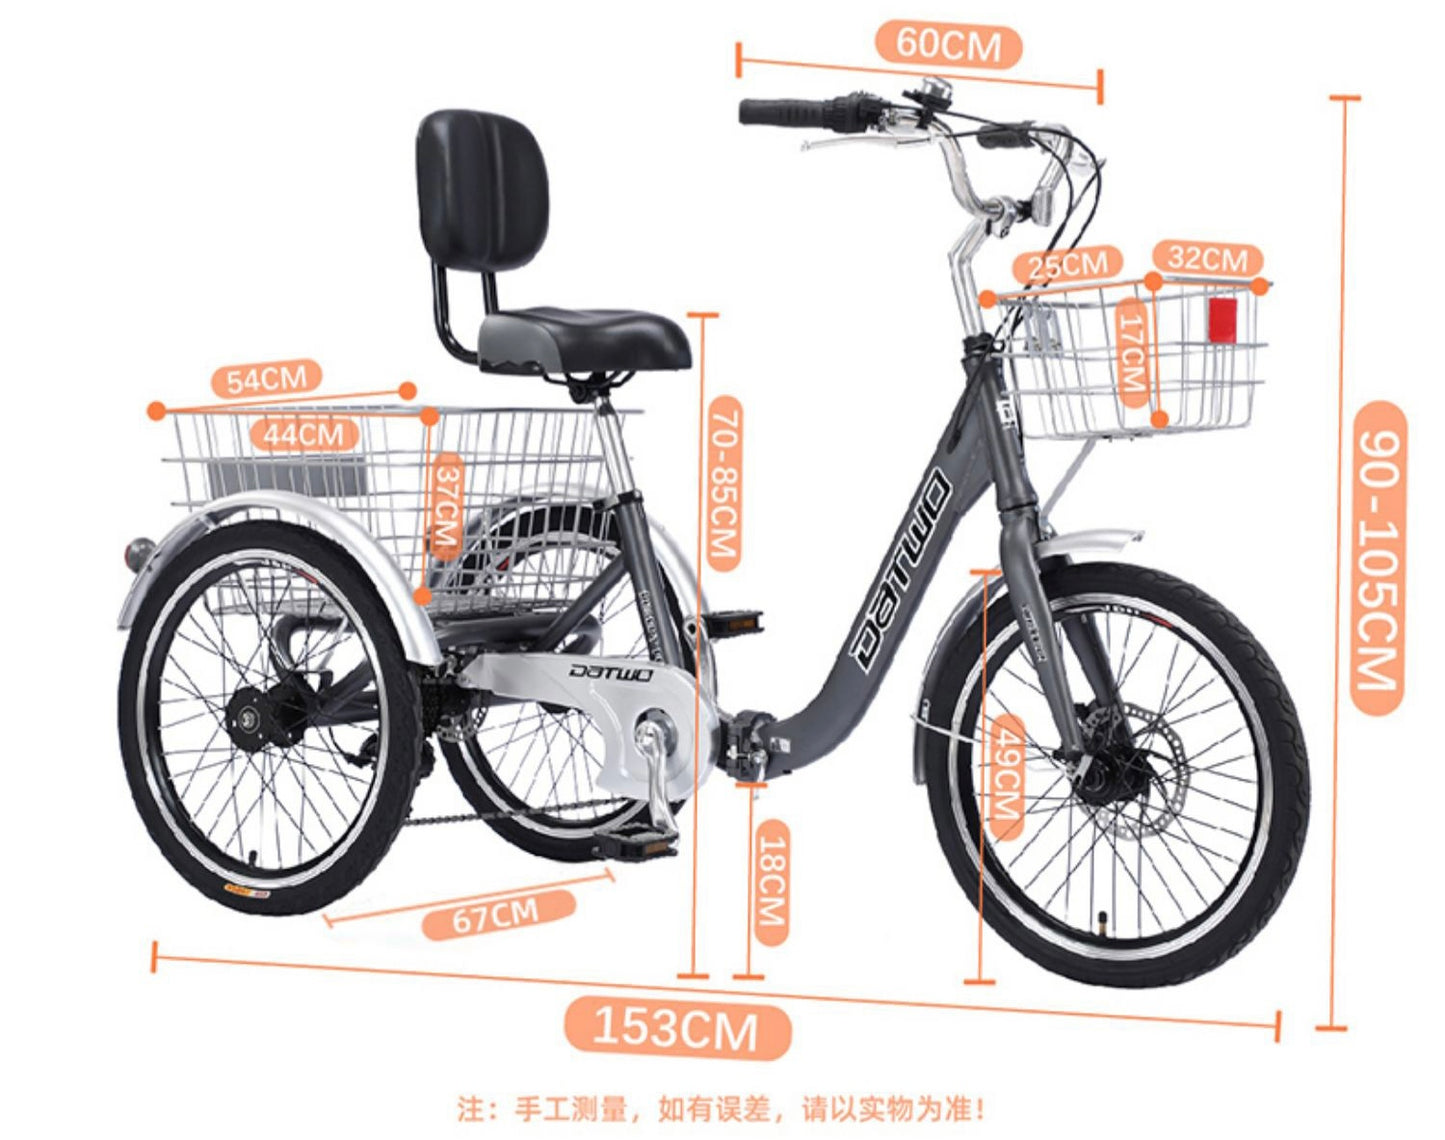 FOREKNOW 20 INCH TRICYCLE GRAY 7 SPEED FOLDABLE BIKE